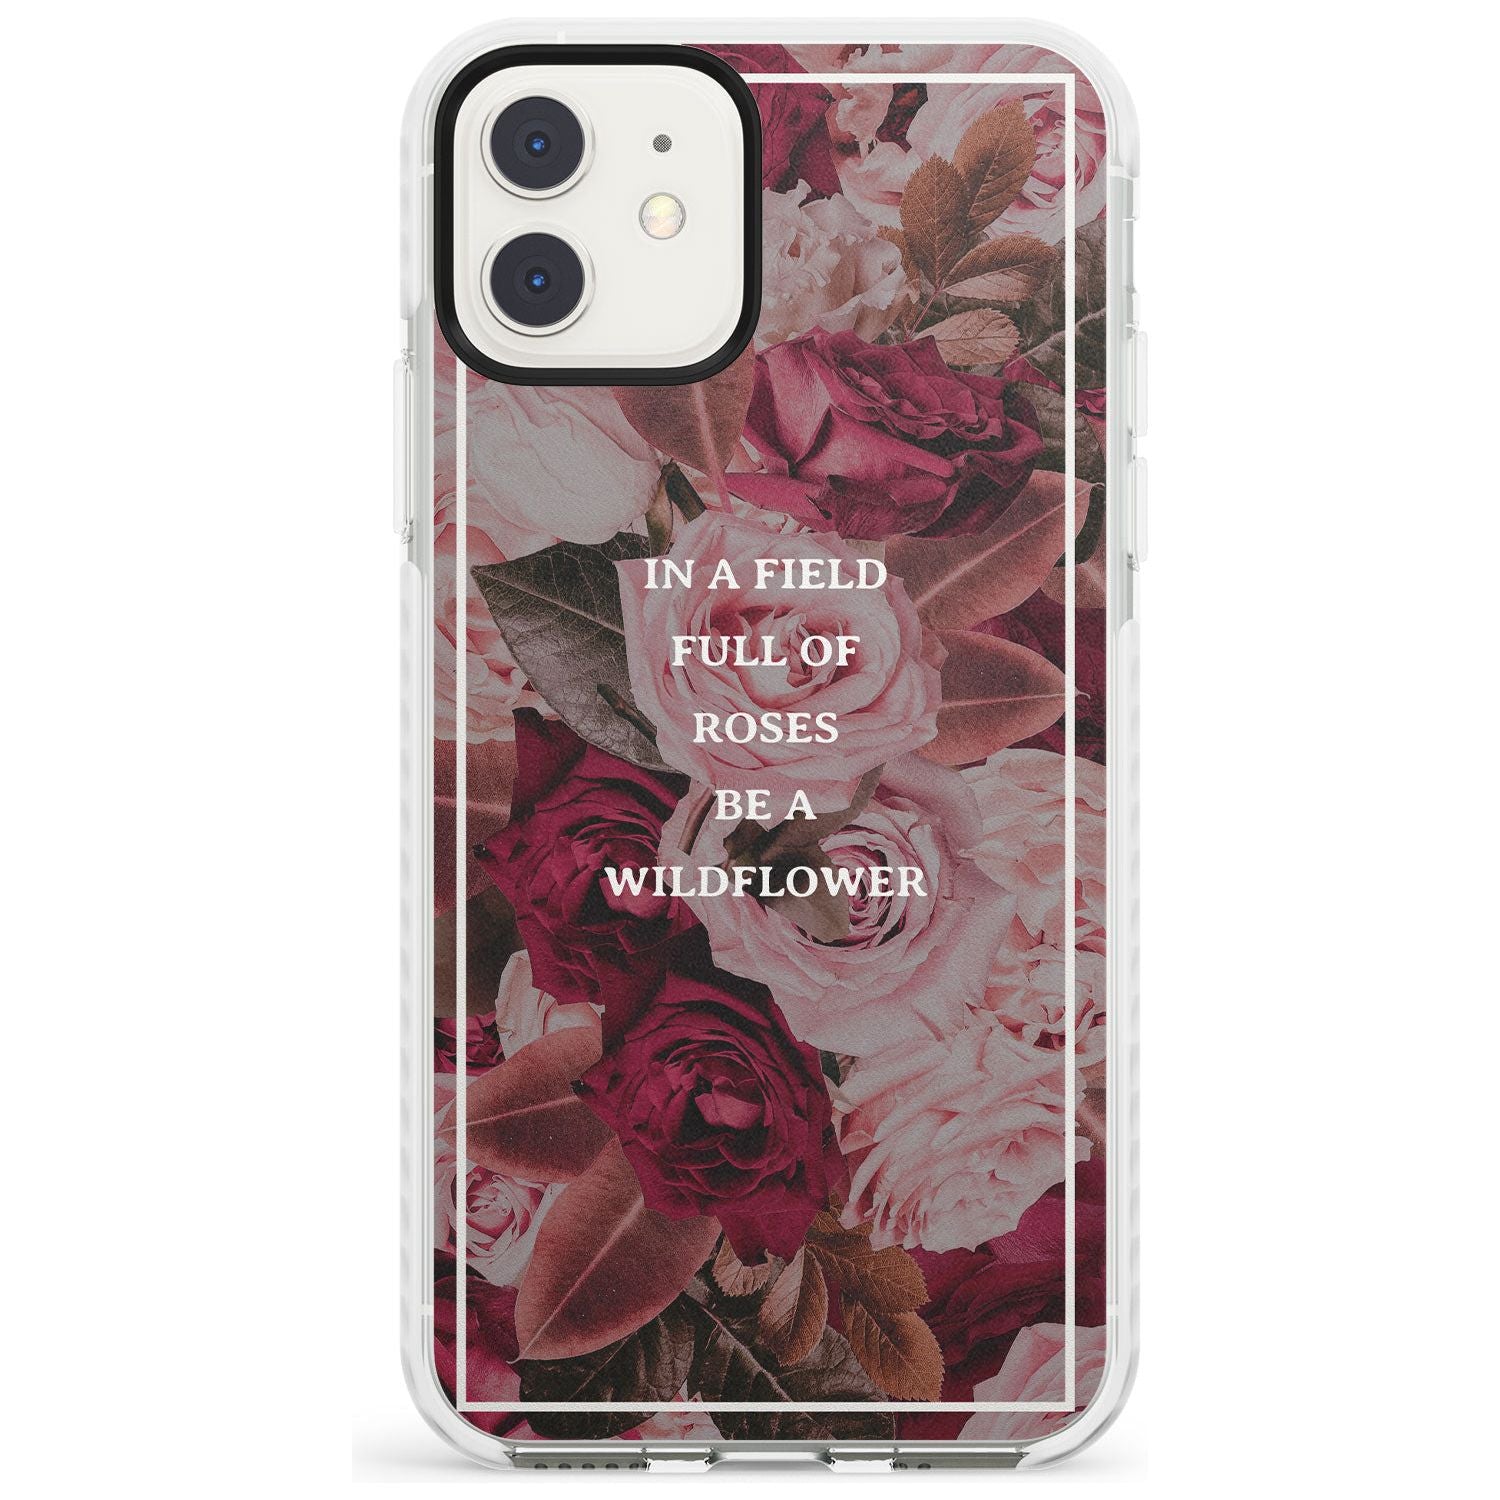 Be a Wildflower Floral Quote Impact Phone Case for iPhone 11